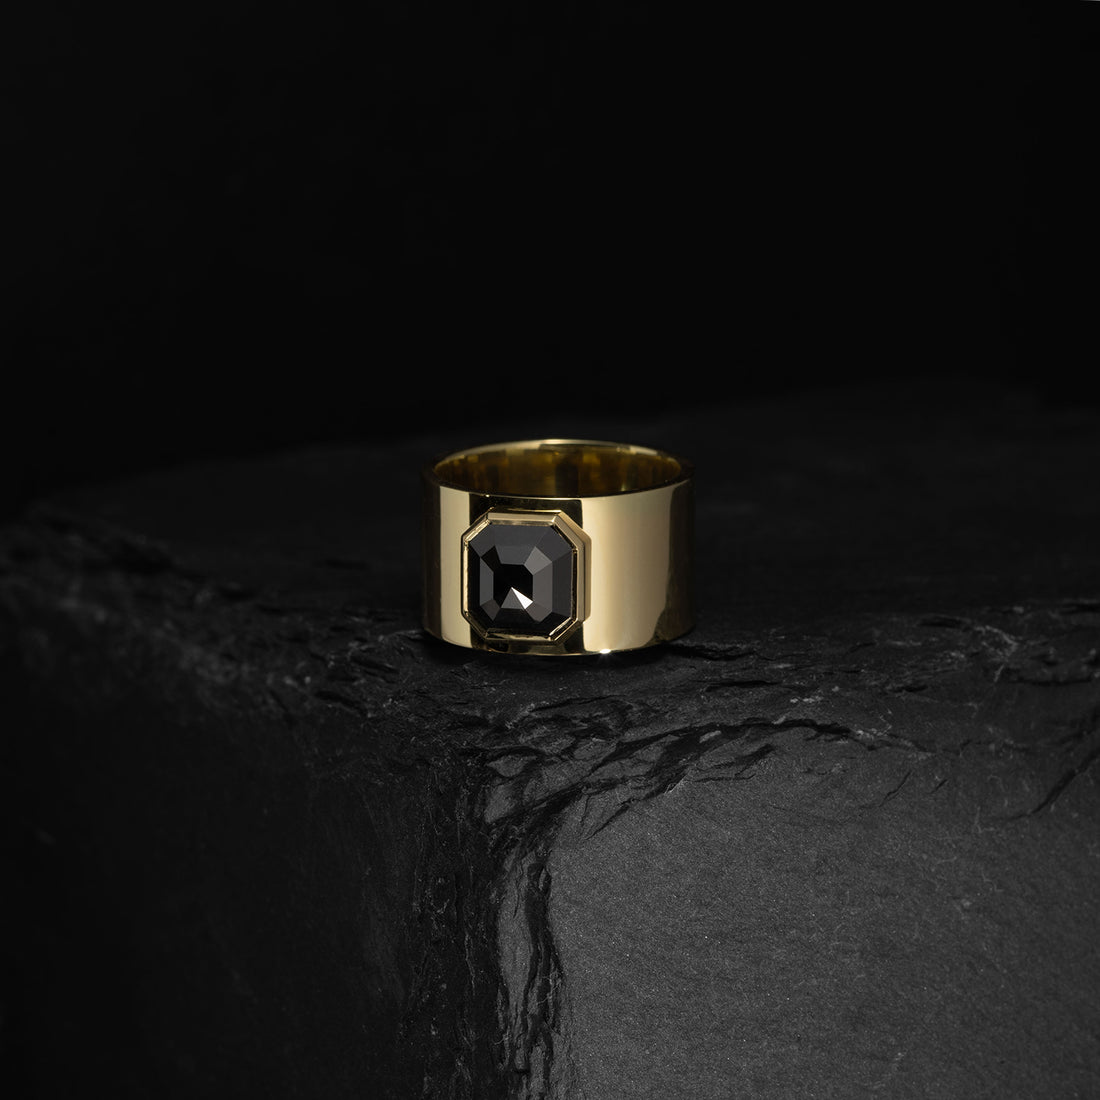 ILA SODHANI Aubergine Black Ring featuring a black cushion cut spinel stone set into a wide yellow gold band; shown on black stone in front of a black background.